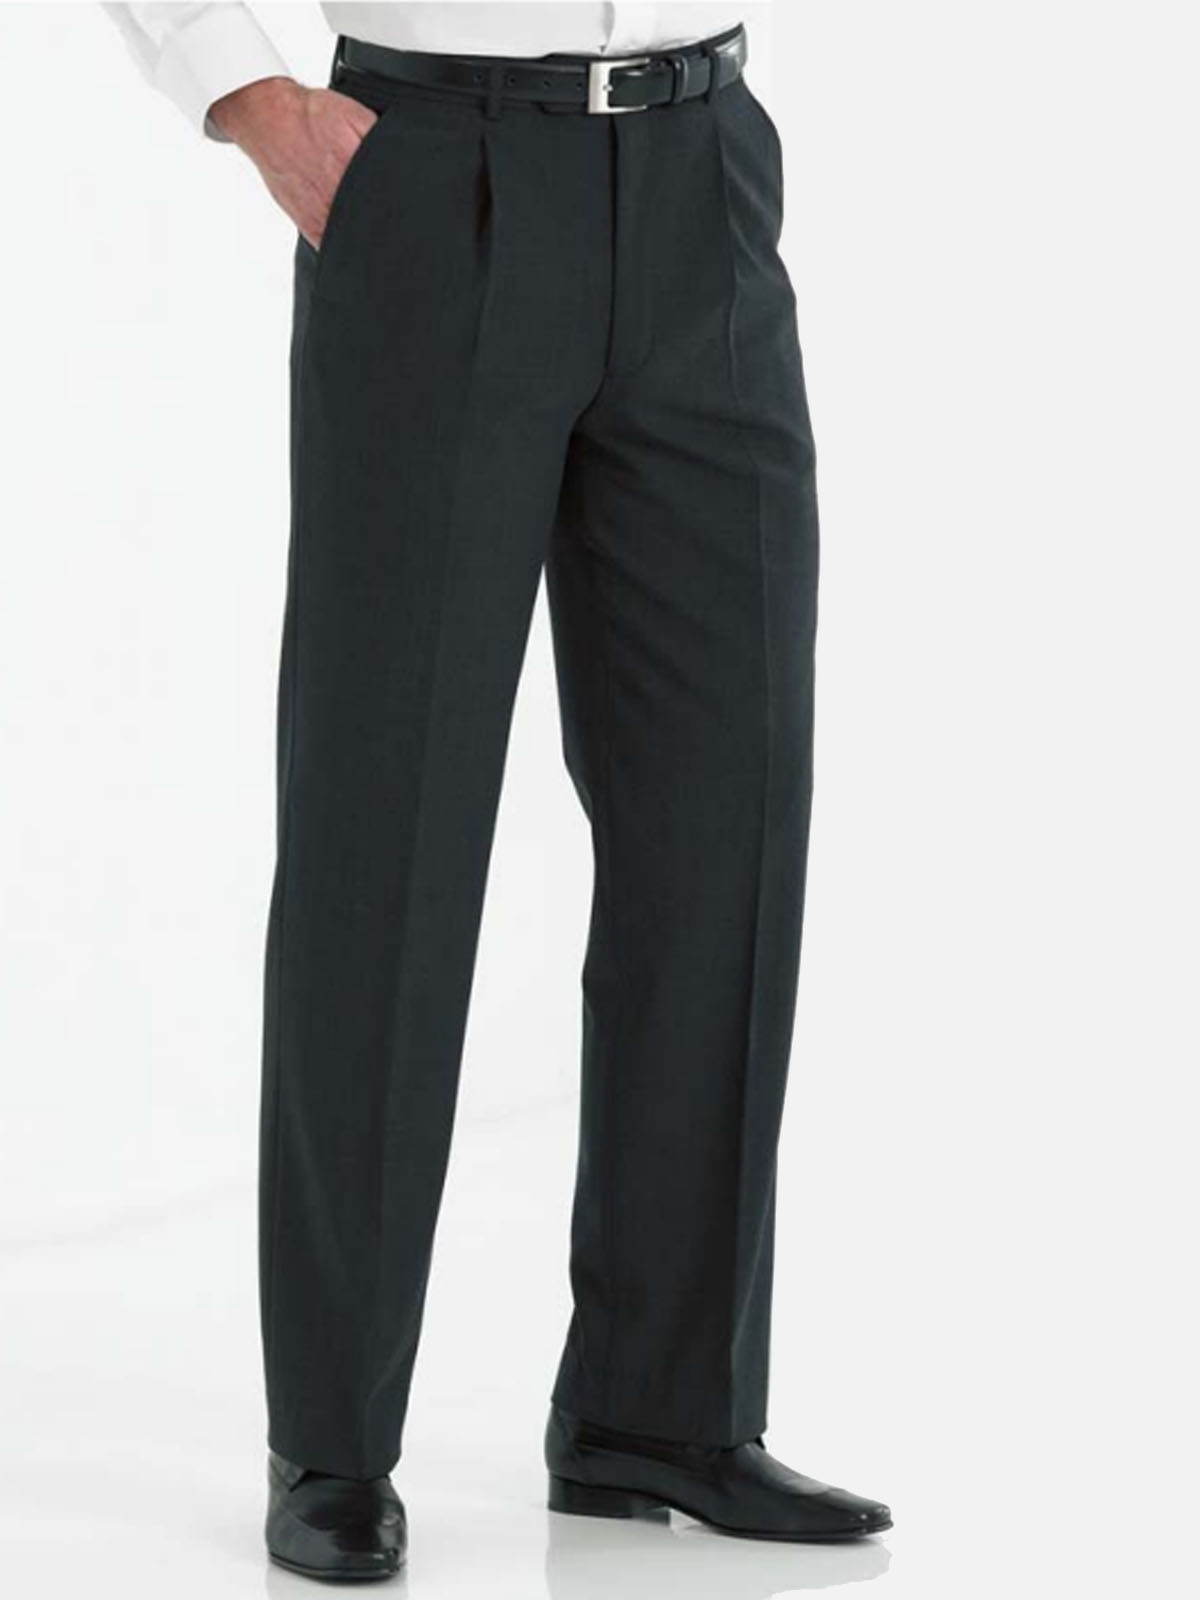 mens trousers col. black size 44 | 53% Polyester 43% Schurwolle 4% Elasthan  | schwarz (Business) | 44 | 605502144